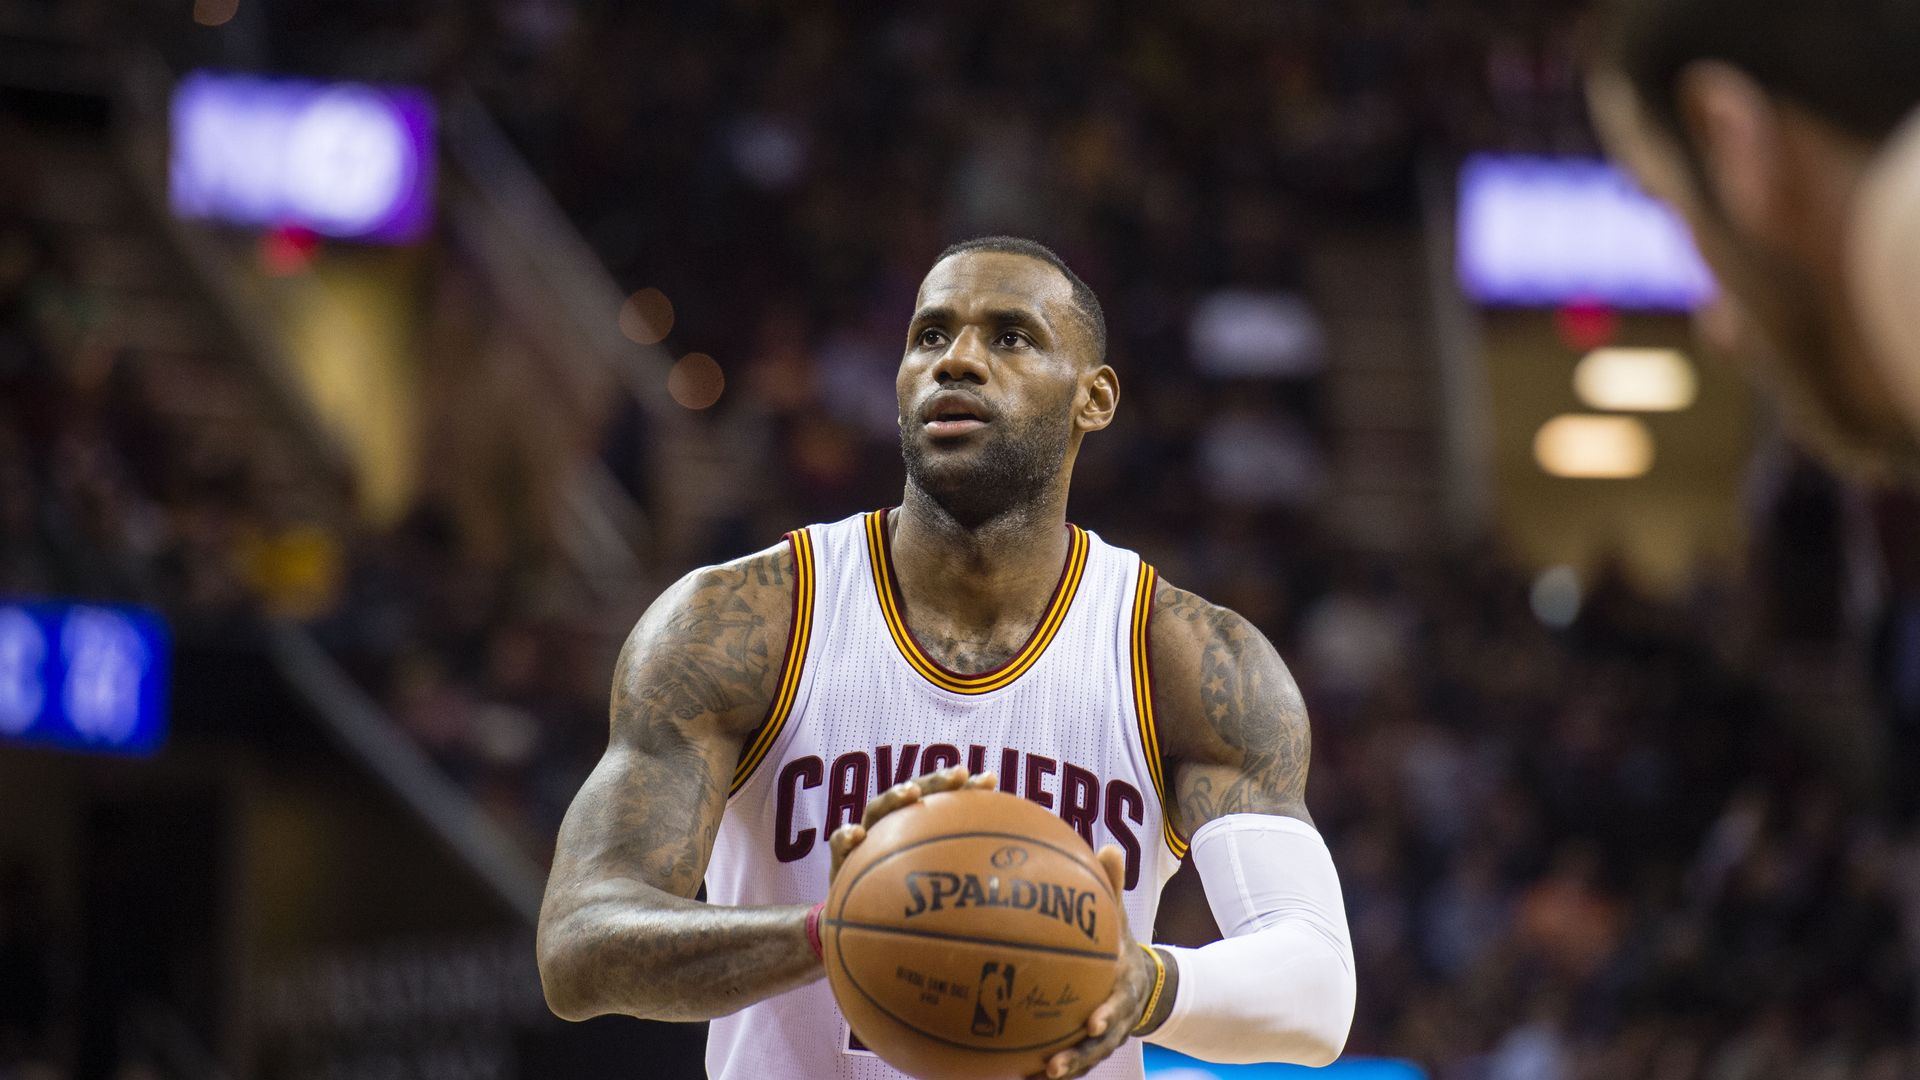 LeBron James made his NBA debut in which year?